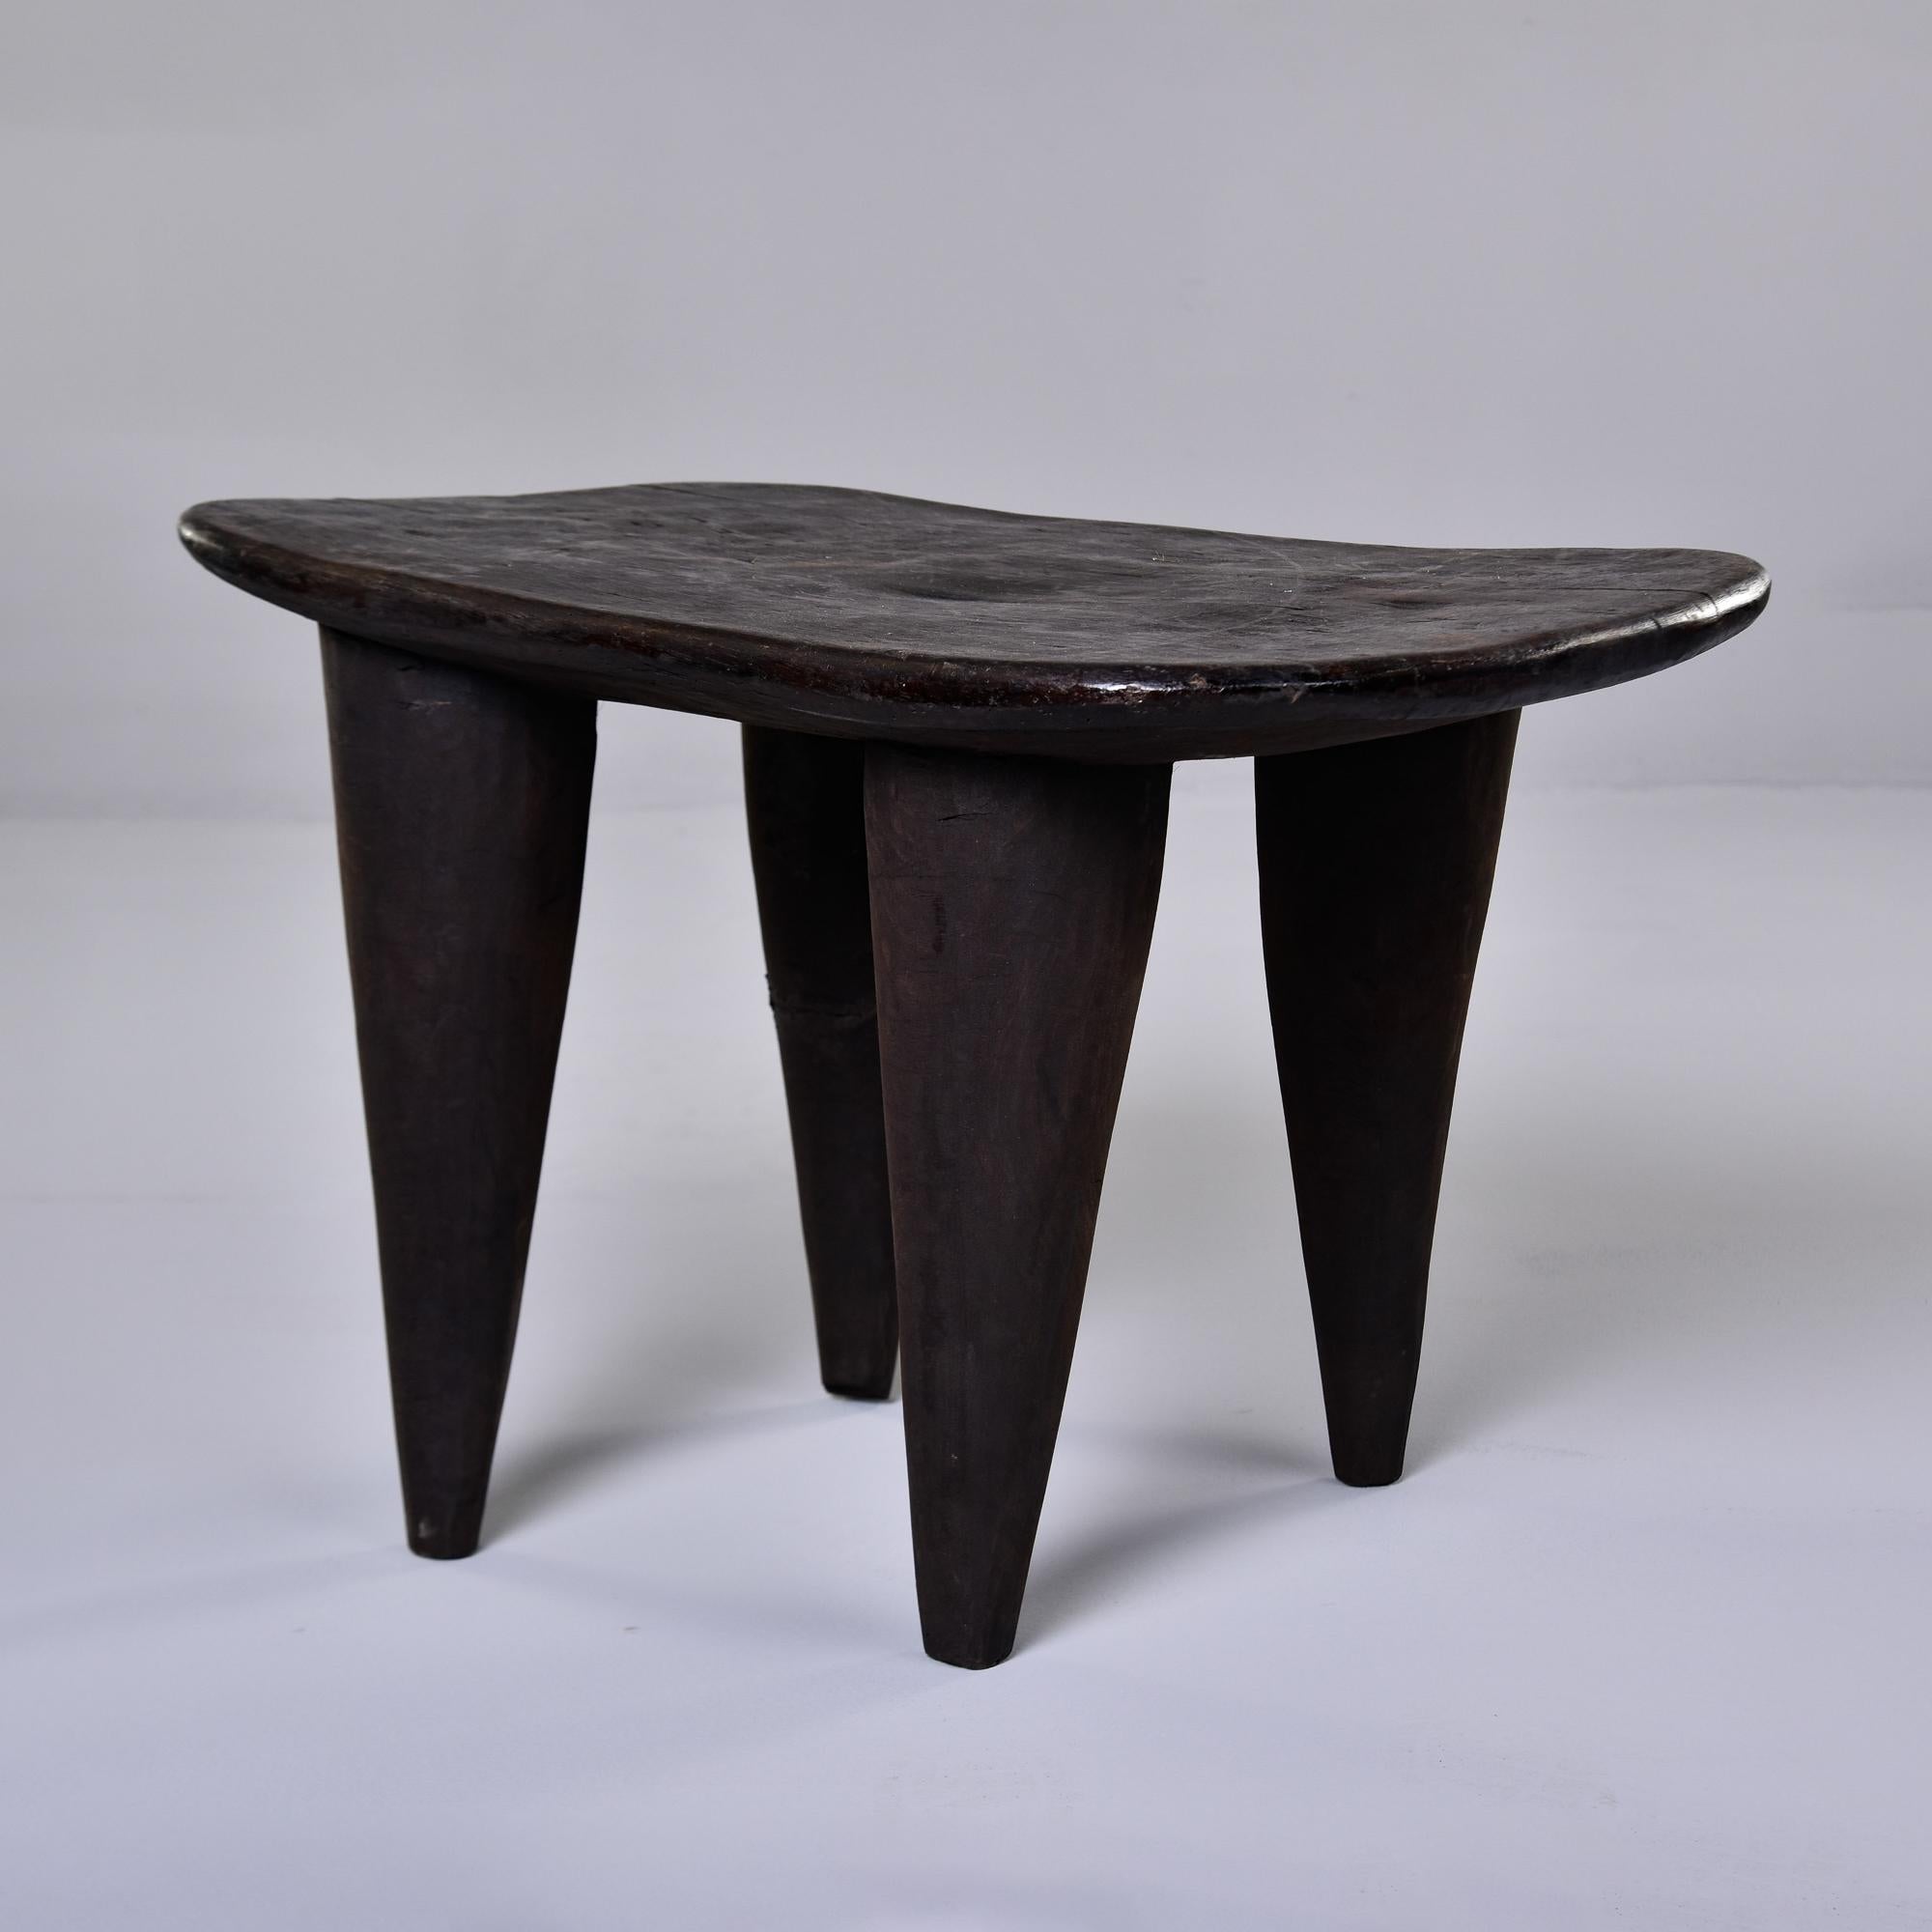 This circa 1980s stool or side table is just under 23” wide. It is hand carved from a single piece of wood with thick, tapered legs by the Senufo people of Cote d’Ivoire. Very distinct and versatile;  this can be used as a stool, ottoman or accent